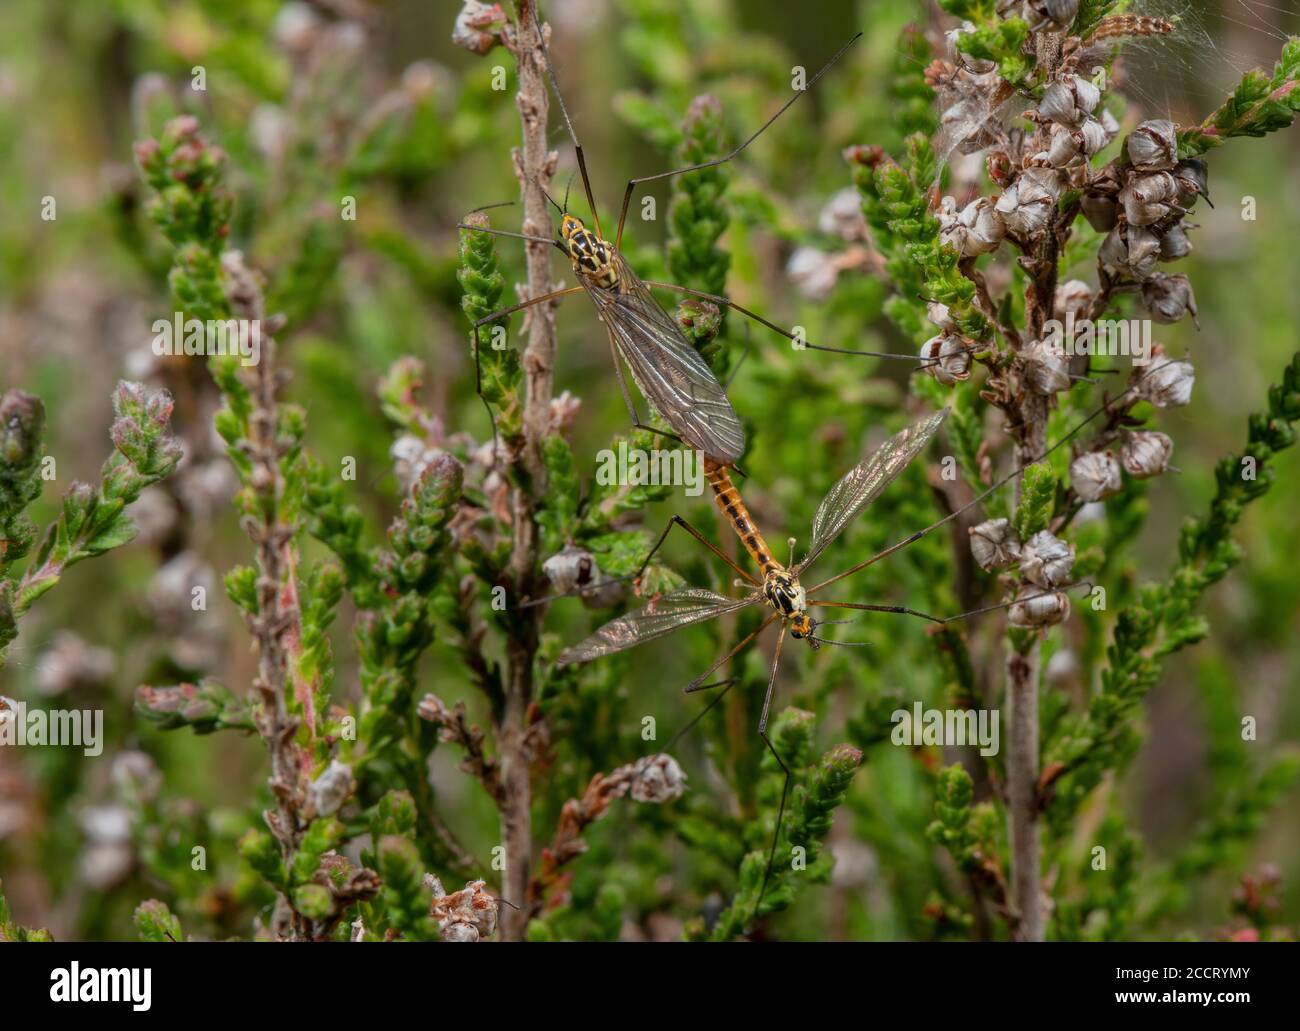 Mating pair of Spotted Cranefly, Nephrotoma appendiculata, perched on ling on heathland, Dorset. Stock Photo